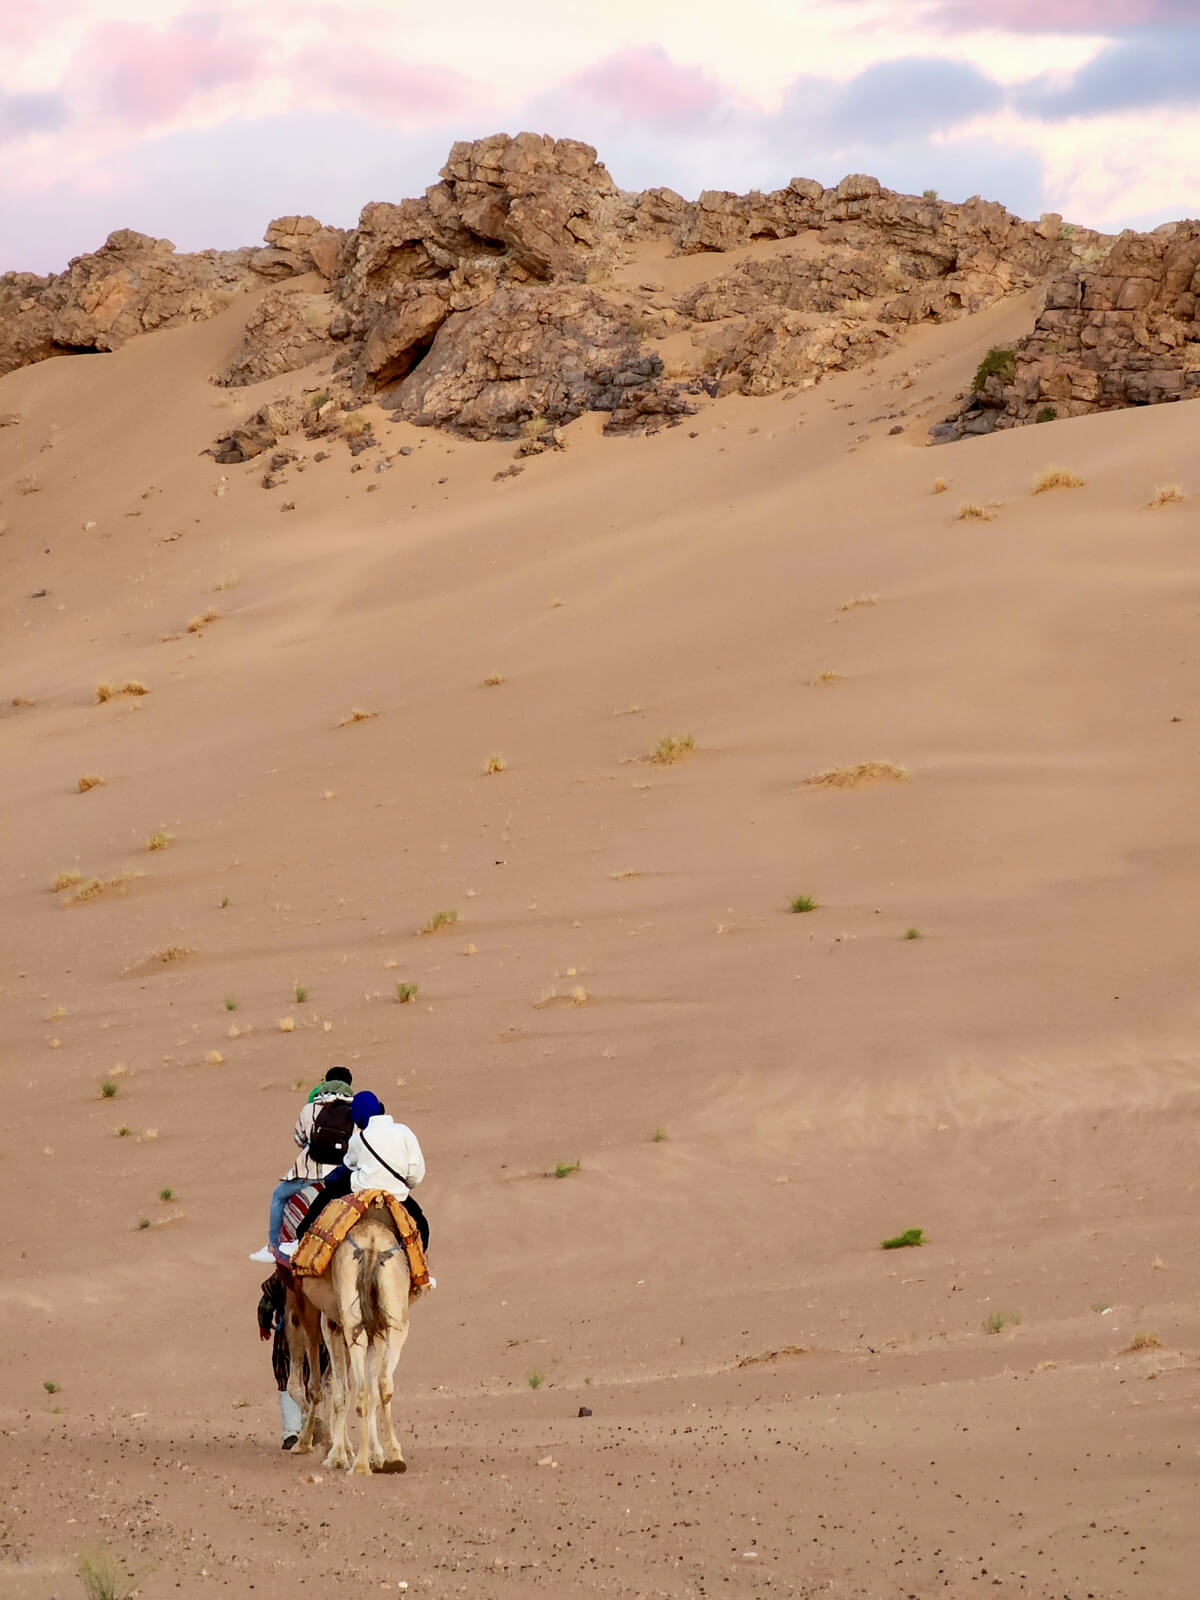 Featured image for “Camel Ride in Zagora”